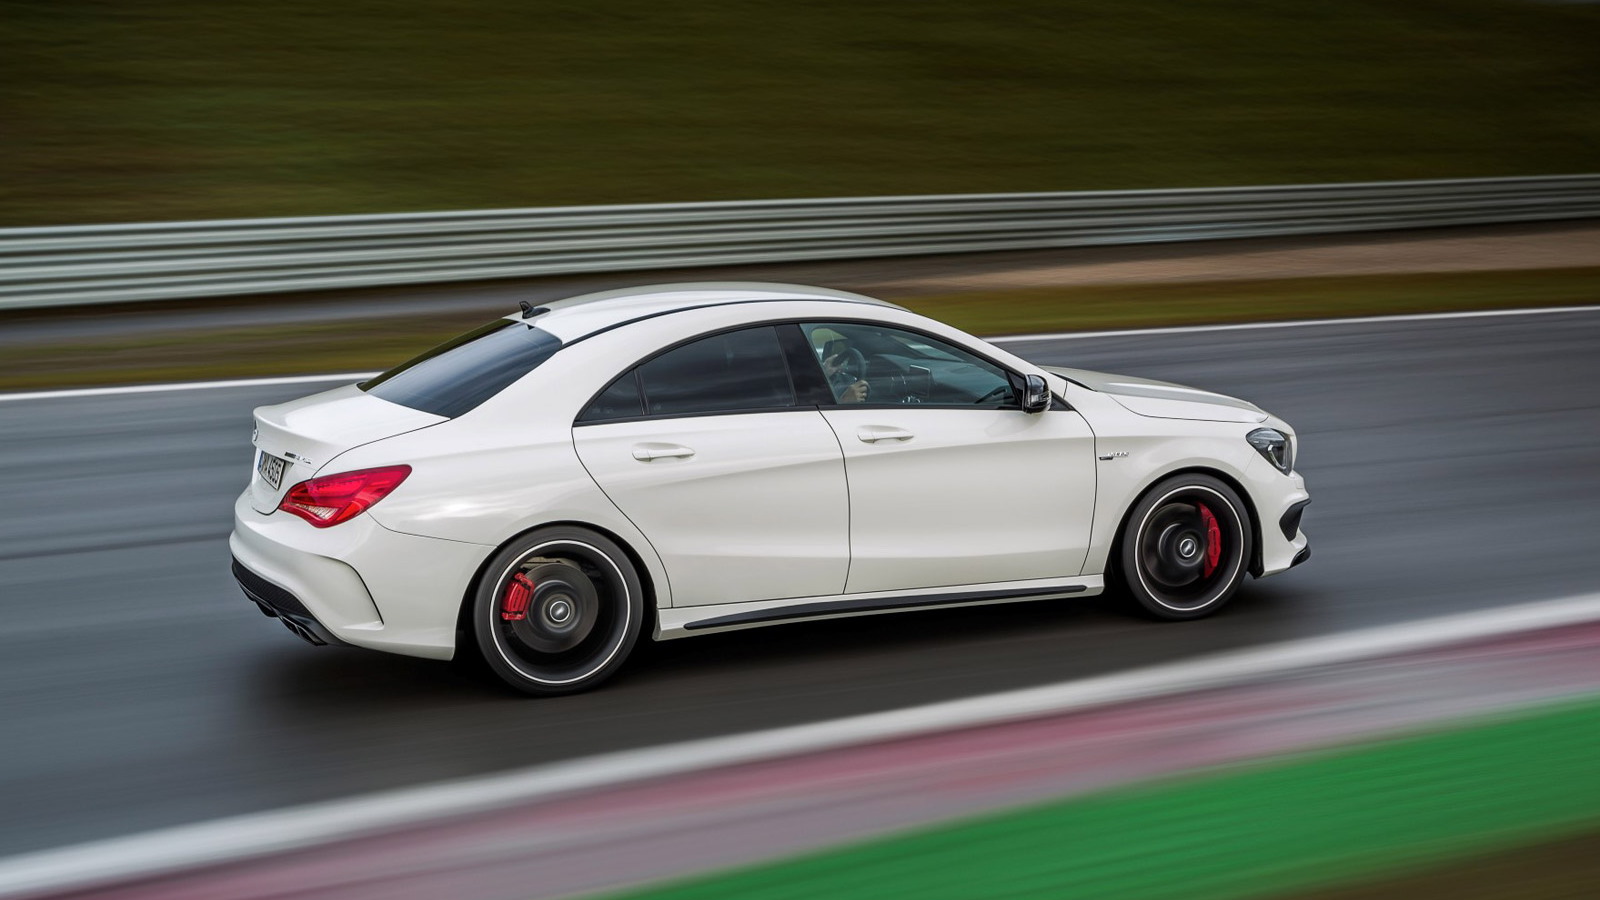 2014 MercedesBenz CLA45 AMG For Sale Features And Price Of 2014 MercedesBenz CLA45 AMG For Sale